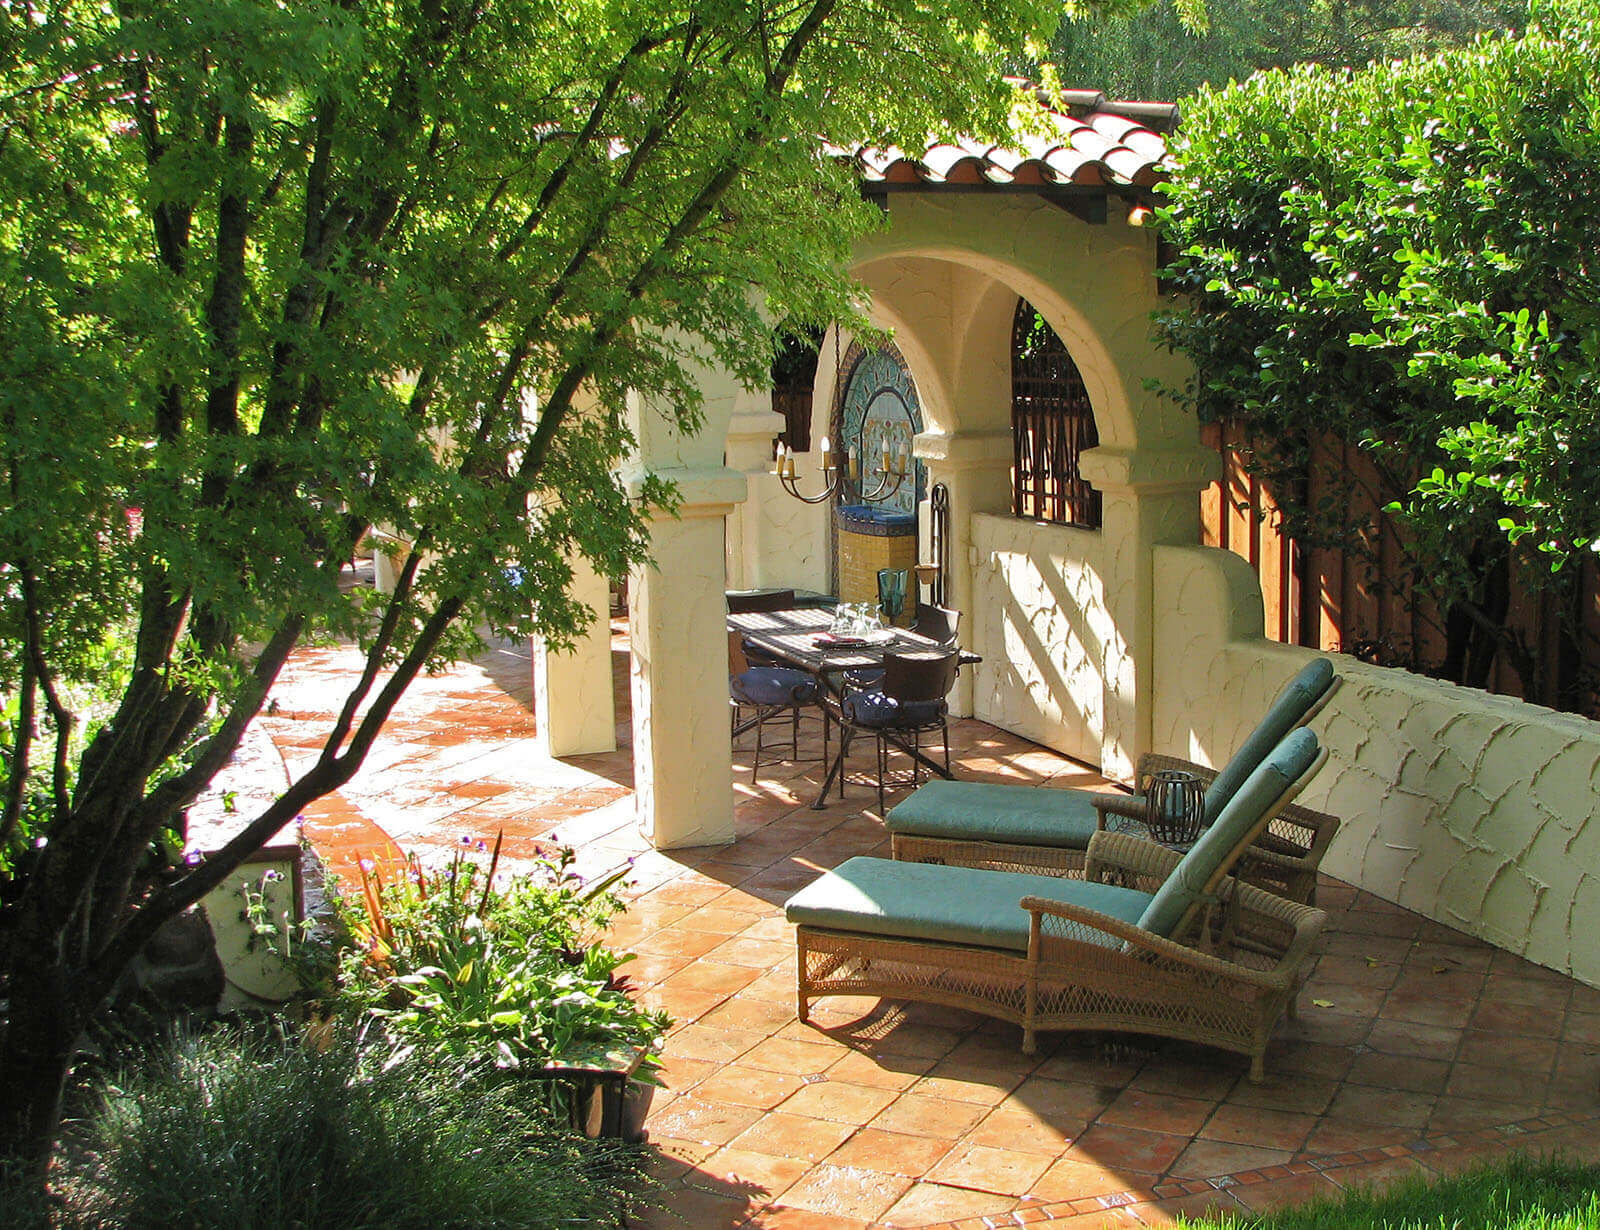 Shady and secluded Saltillo-tiled patio with lounge chairs and Mission-style pergola